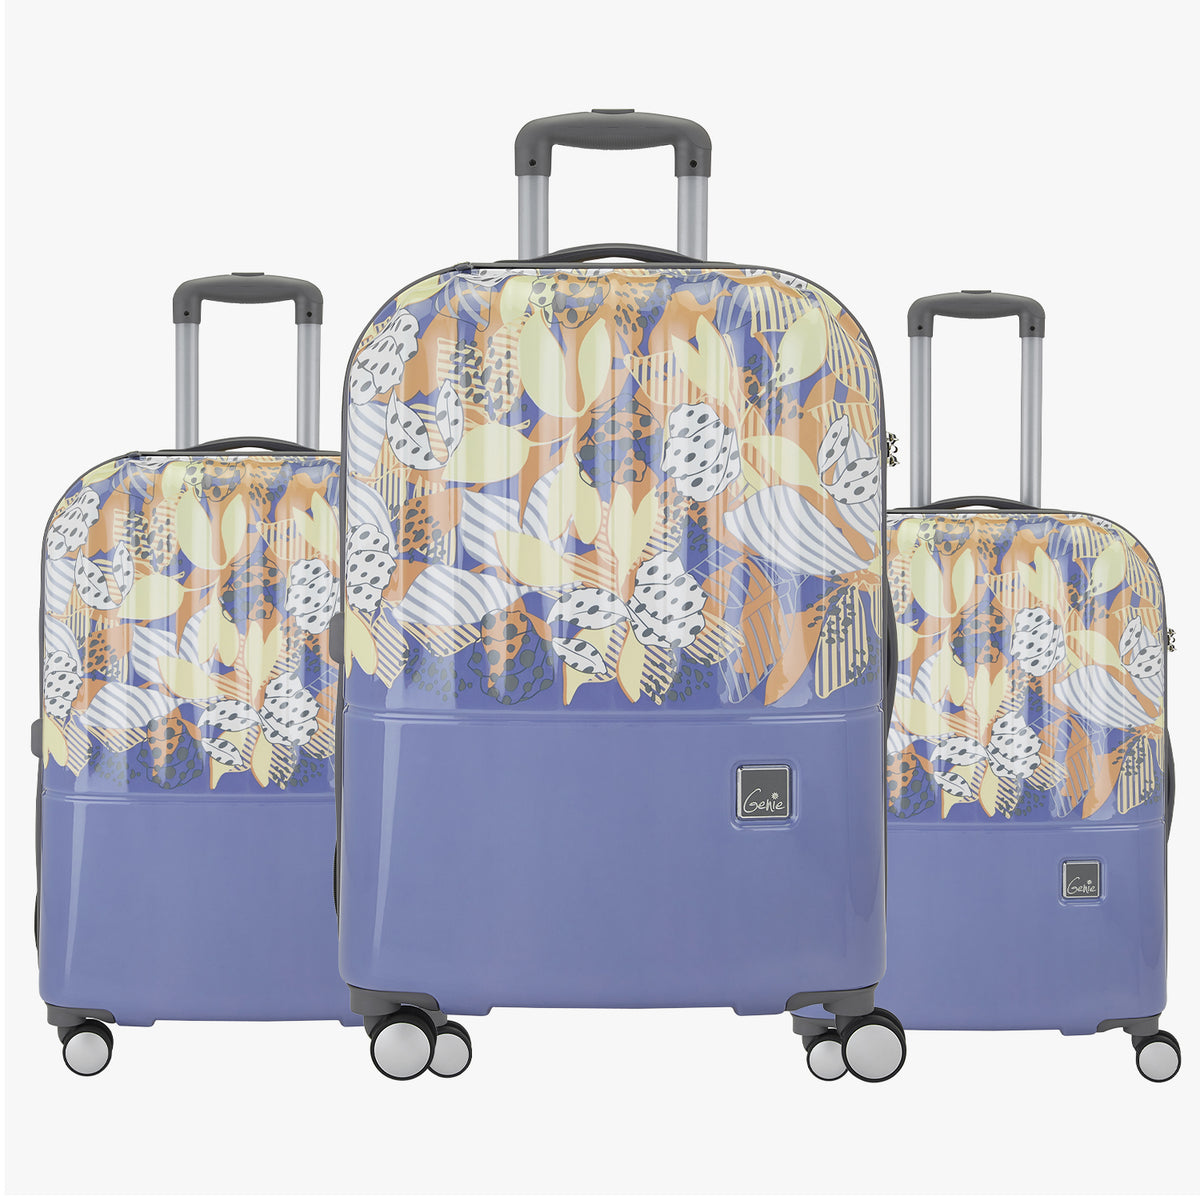 Sprout Small, Medium and Large Hard Luggage Combo Set